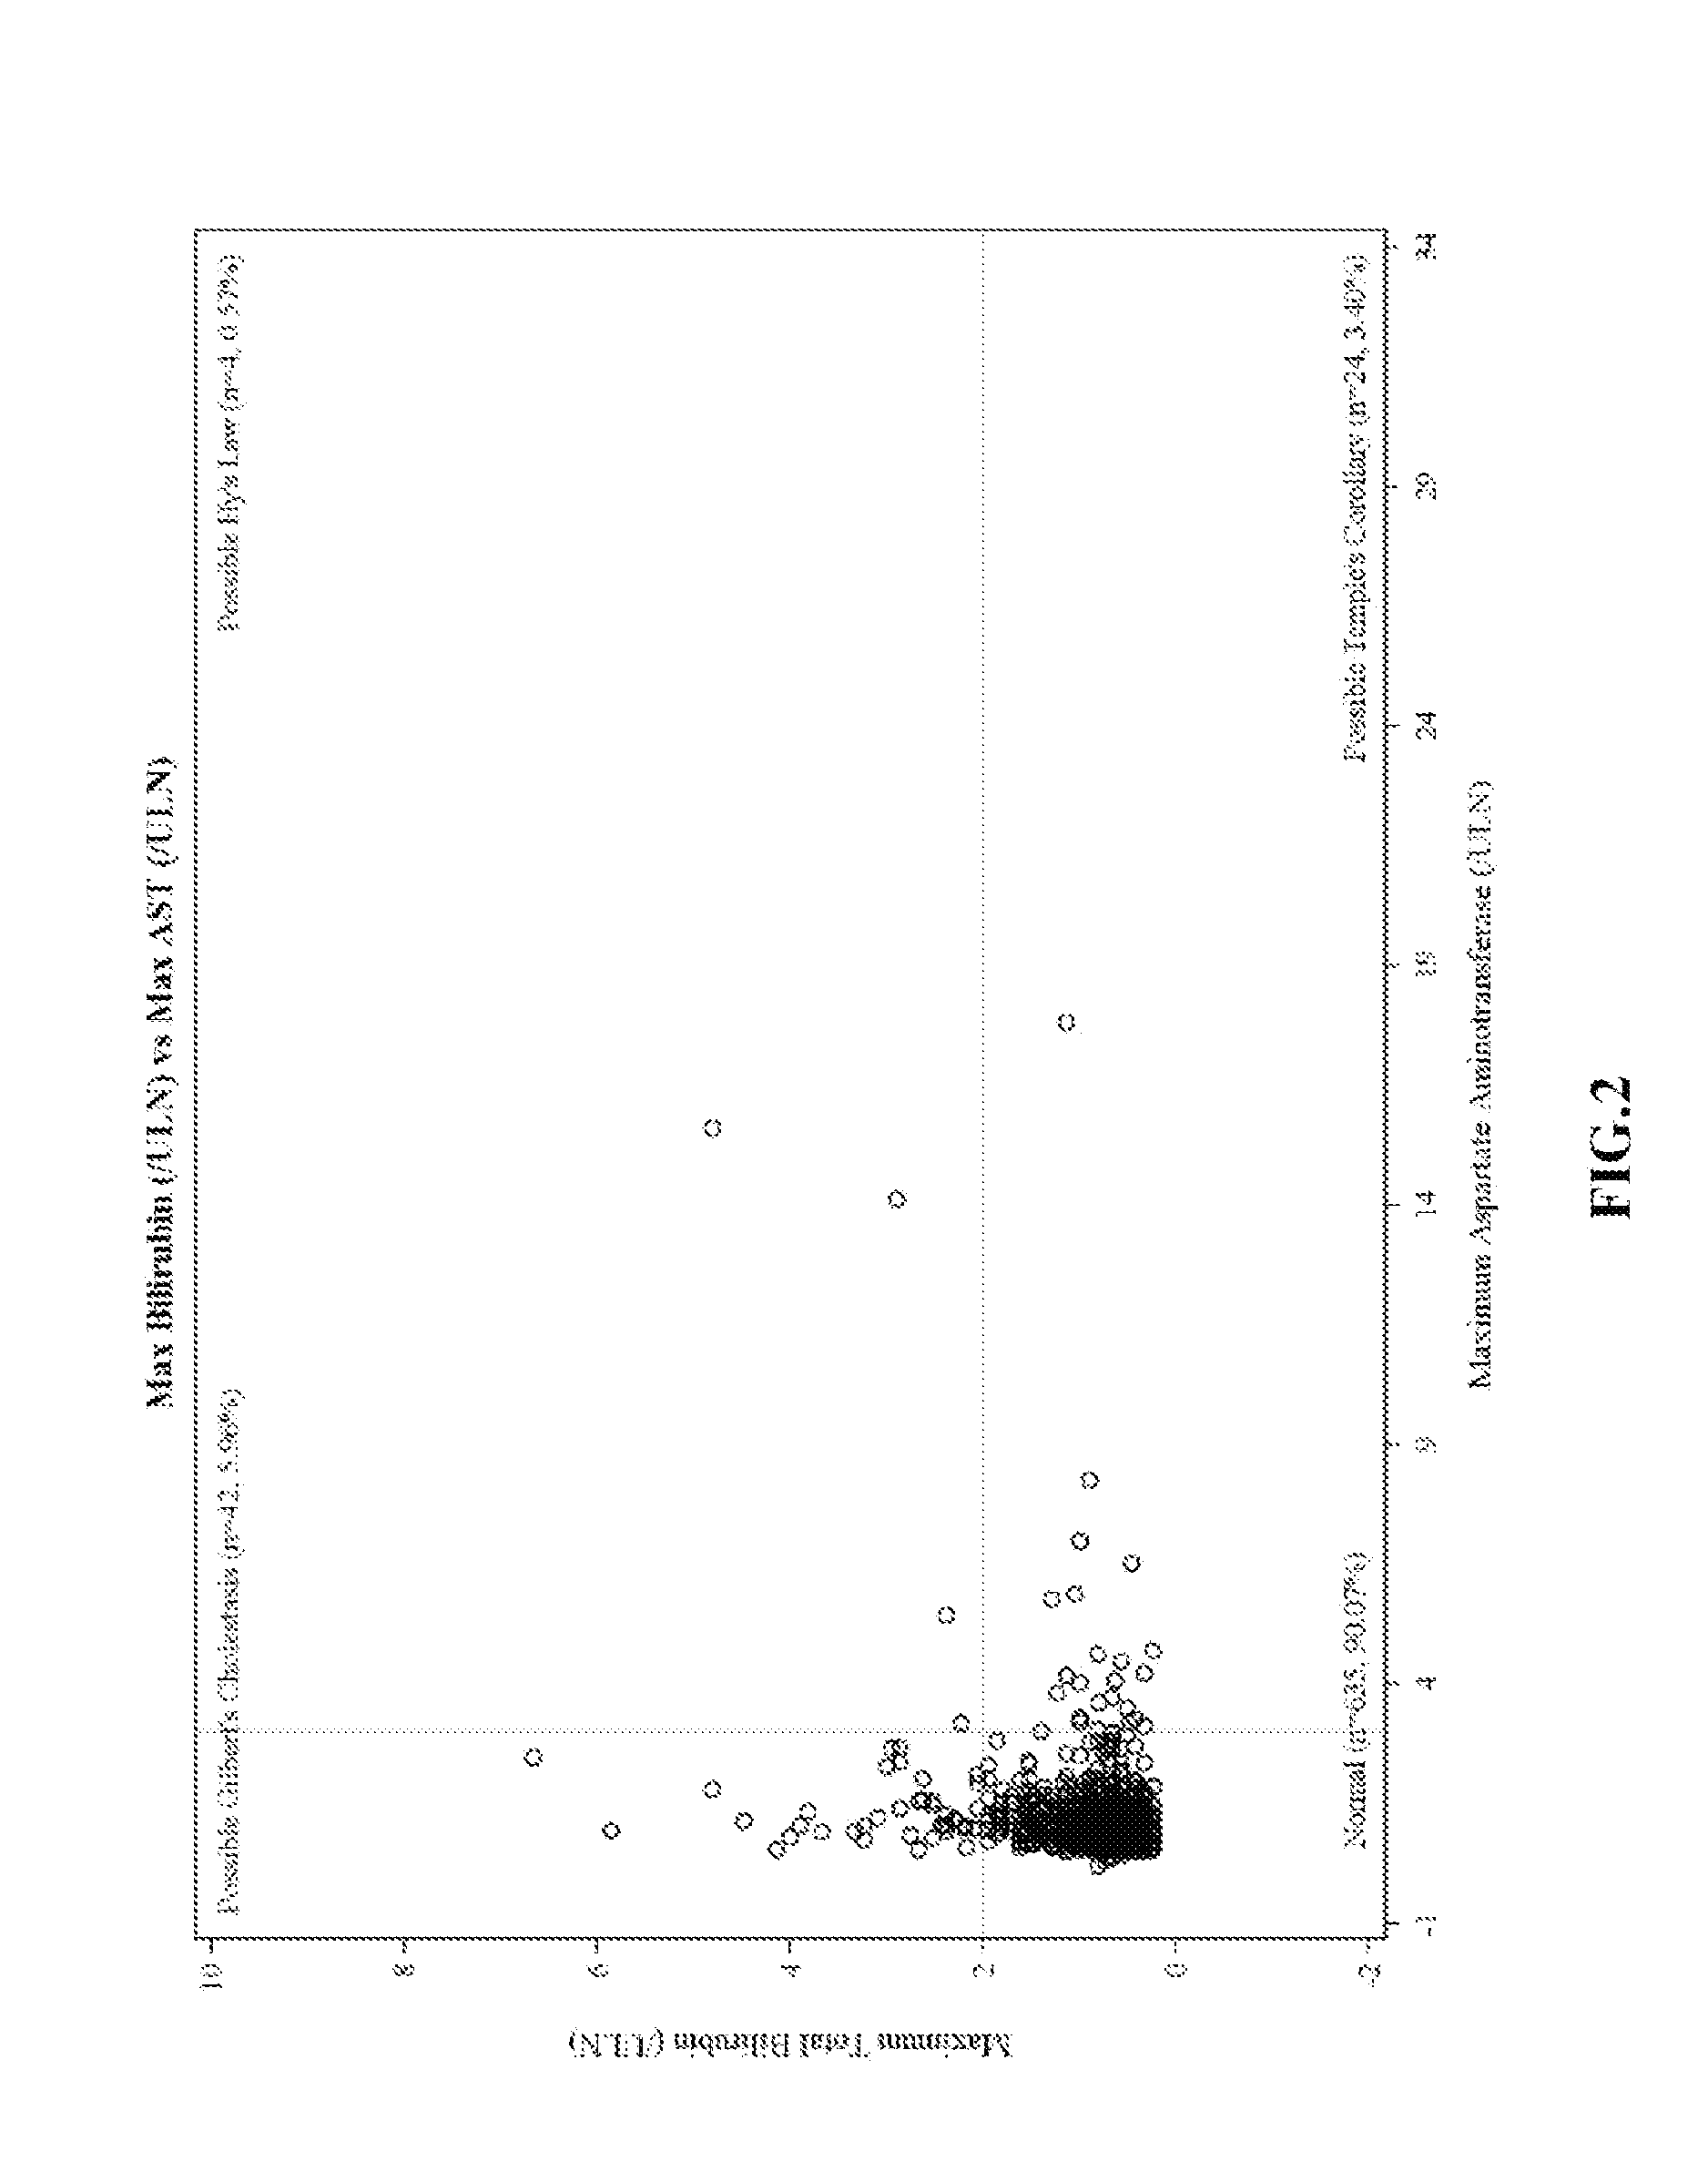 Method for treating pulmonary arterial hypertension in a patient not having idiopathic pulmonary fibrosis